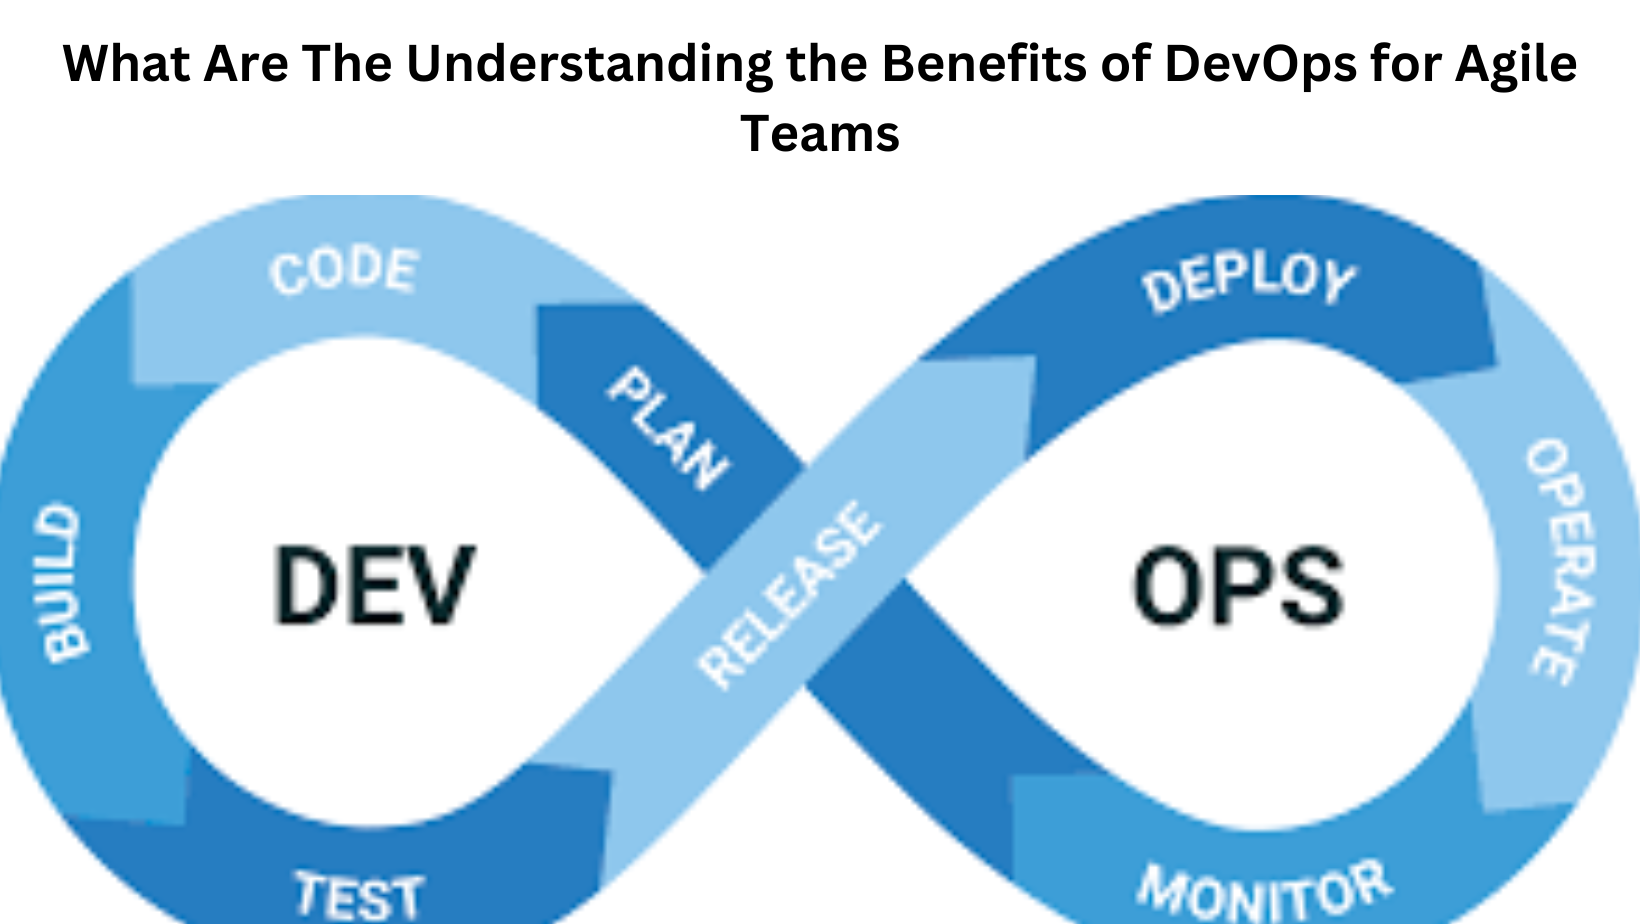 What Are The Understanding the Benefits of DevOps for Agile Teams